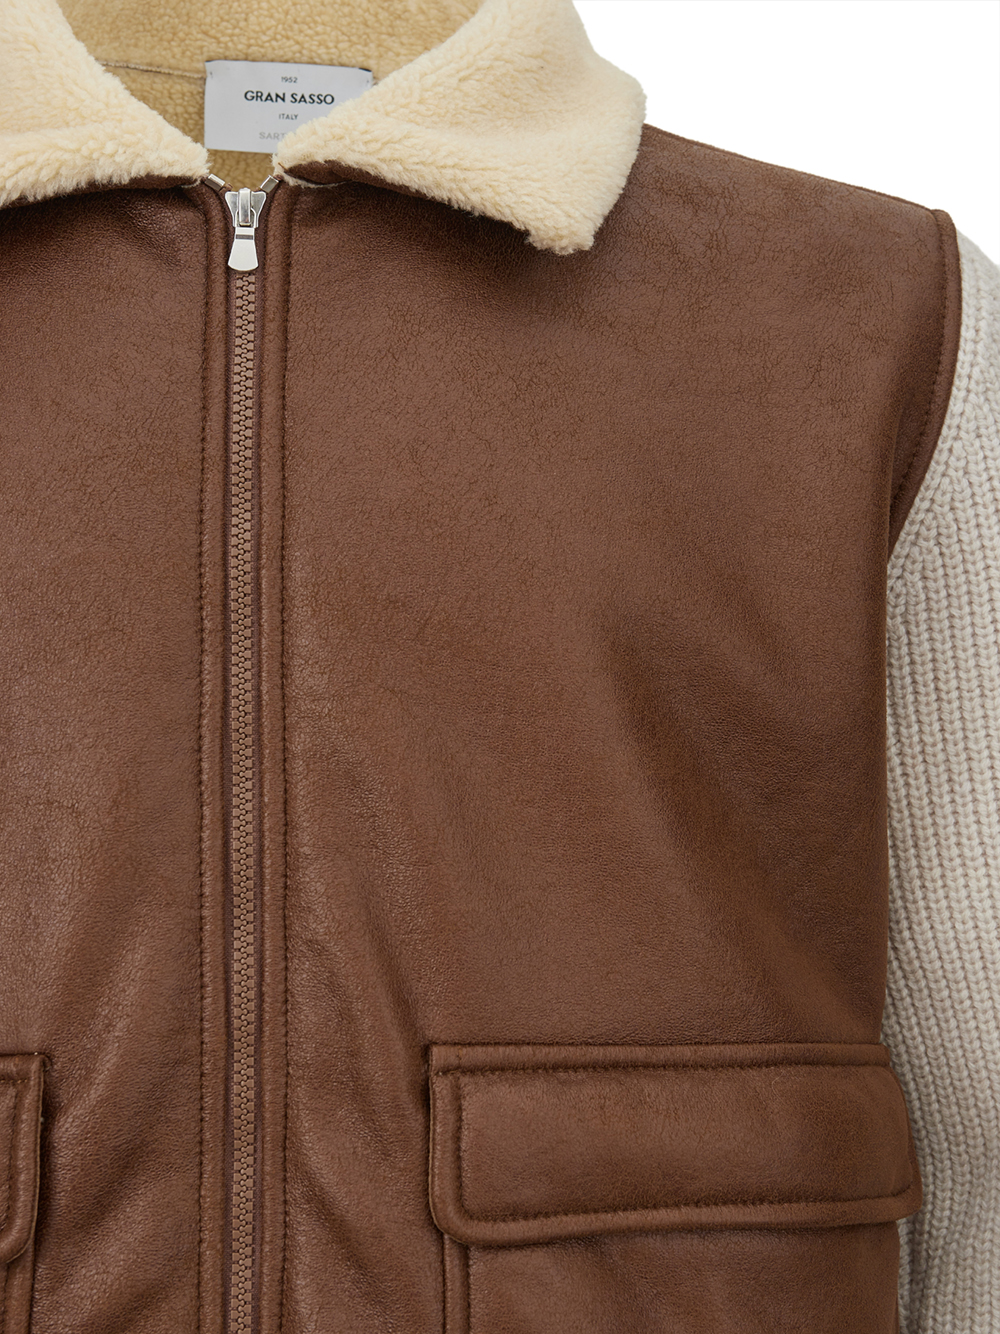 Wool and Eco-Leather Brown Jacket